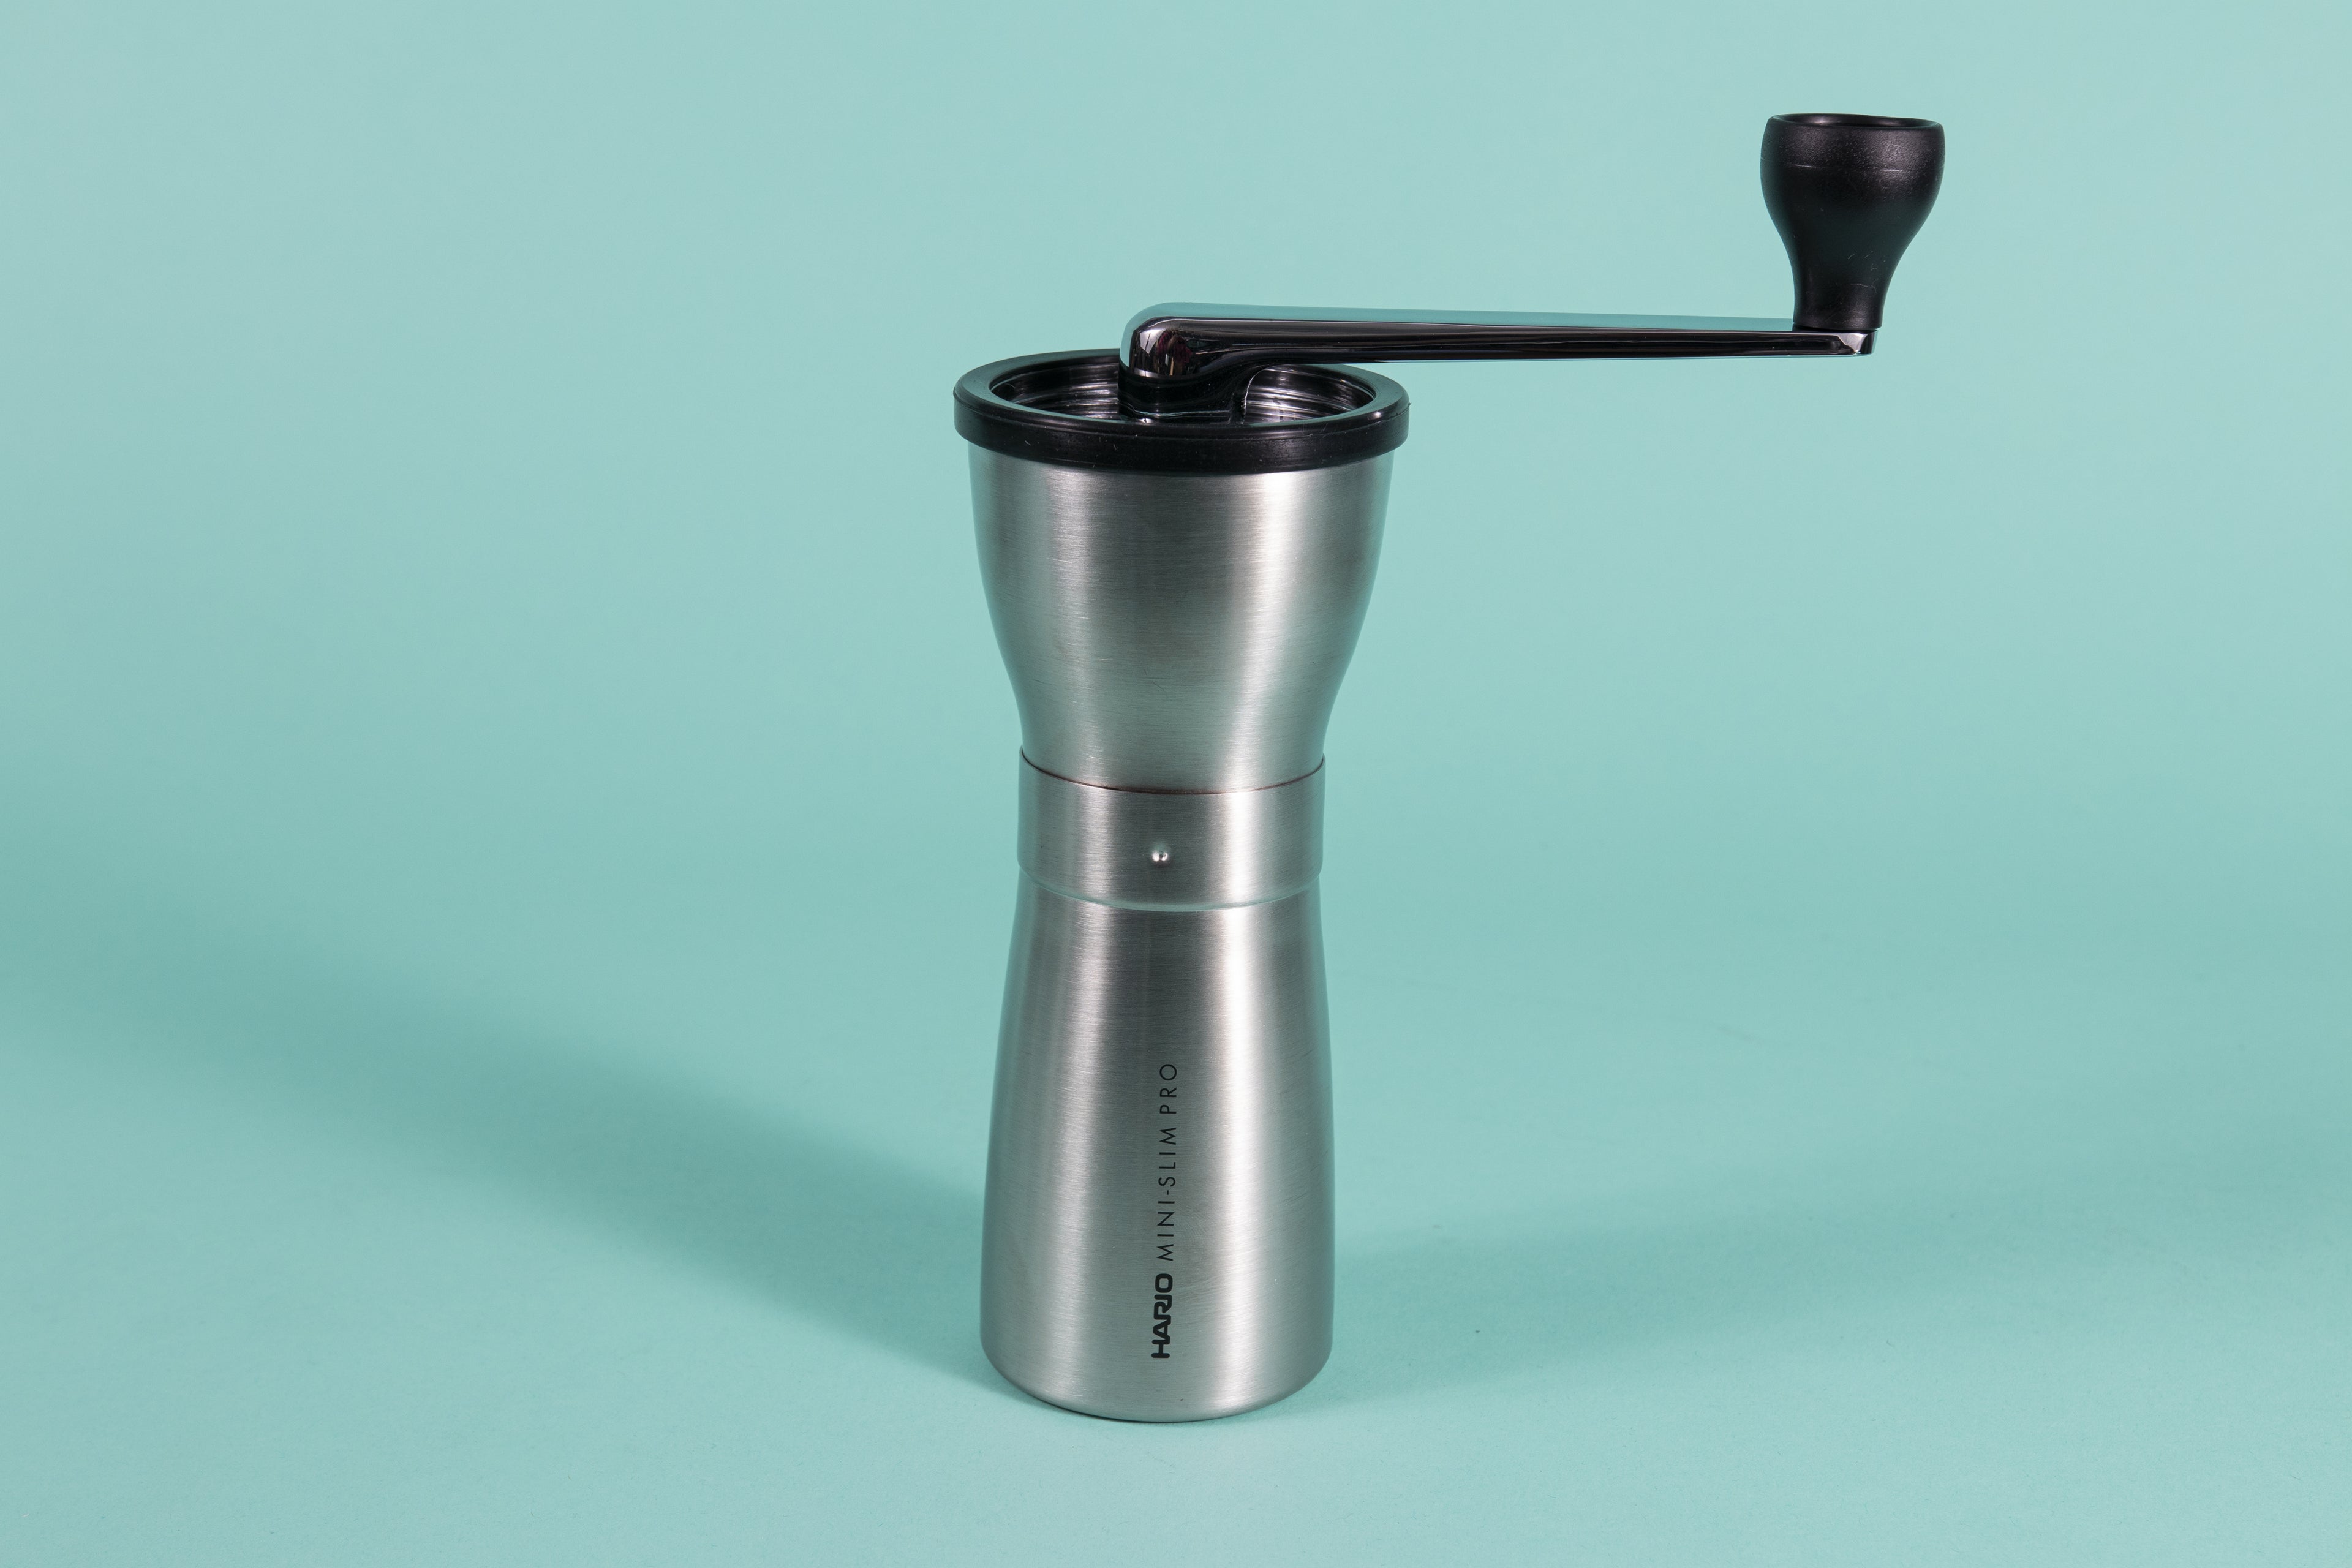 Slim silver metal coffee grinder with rubber lid and metal lever with black plastic knob at the end.